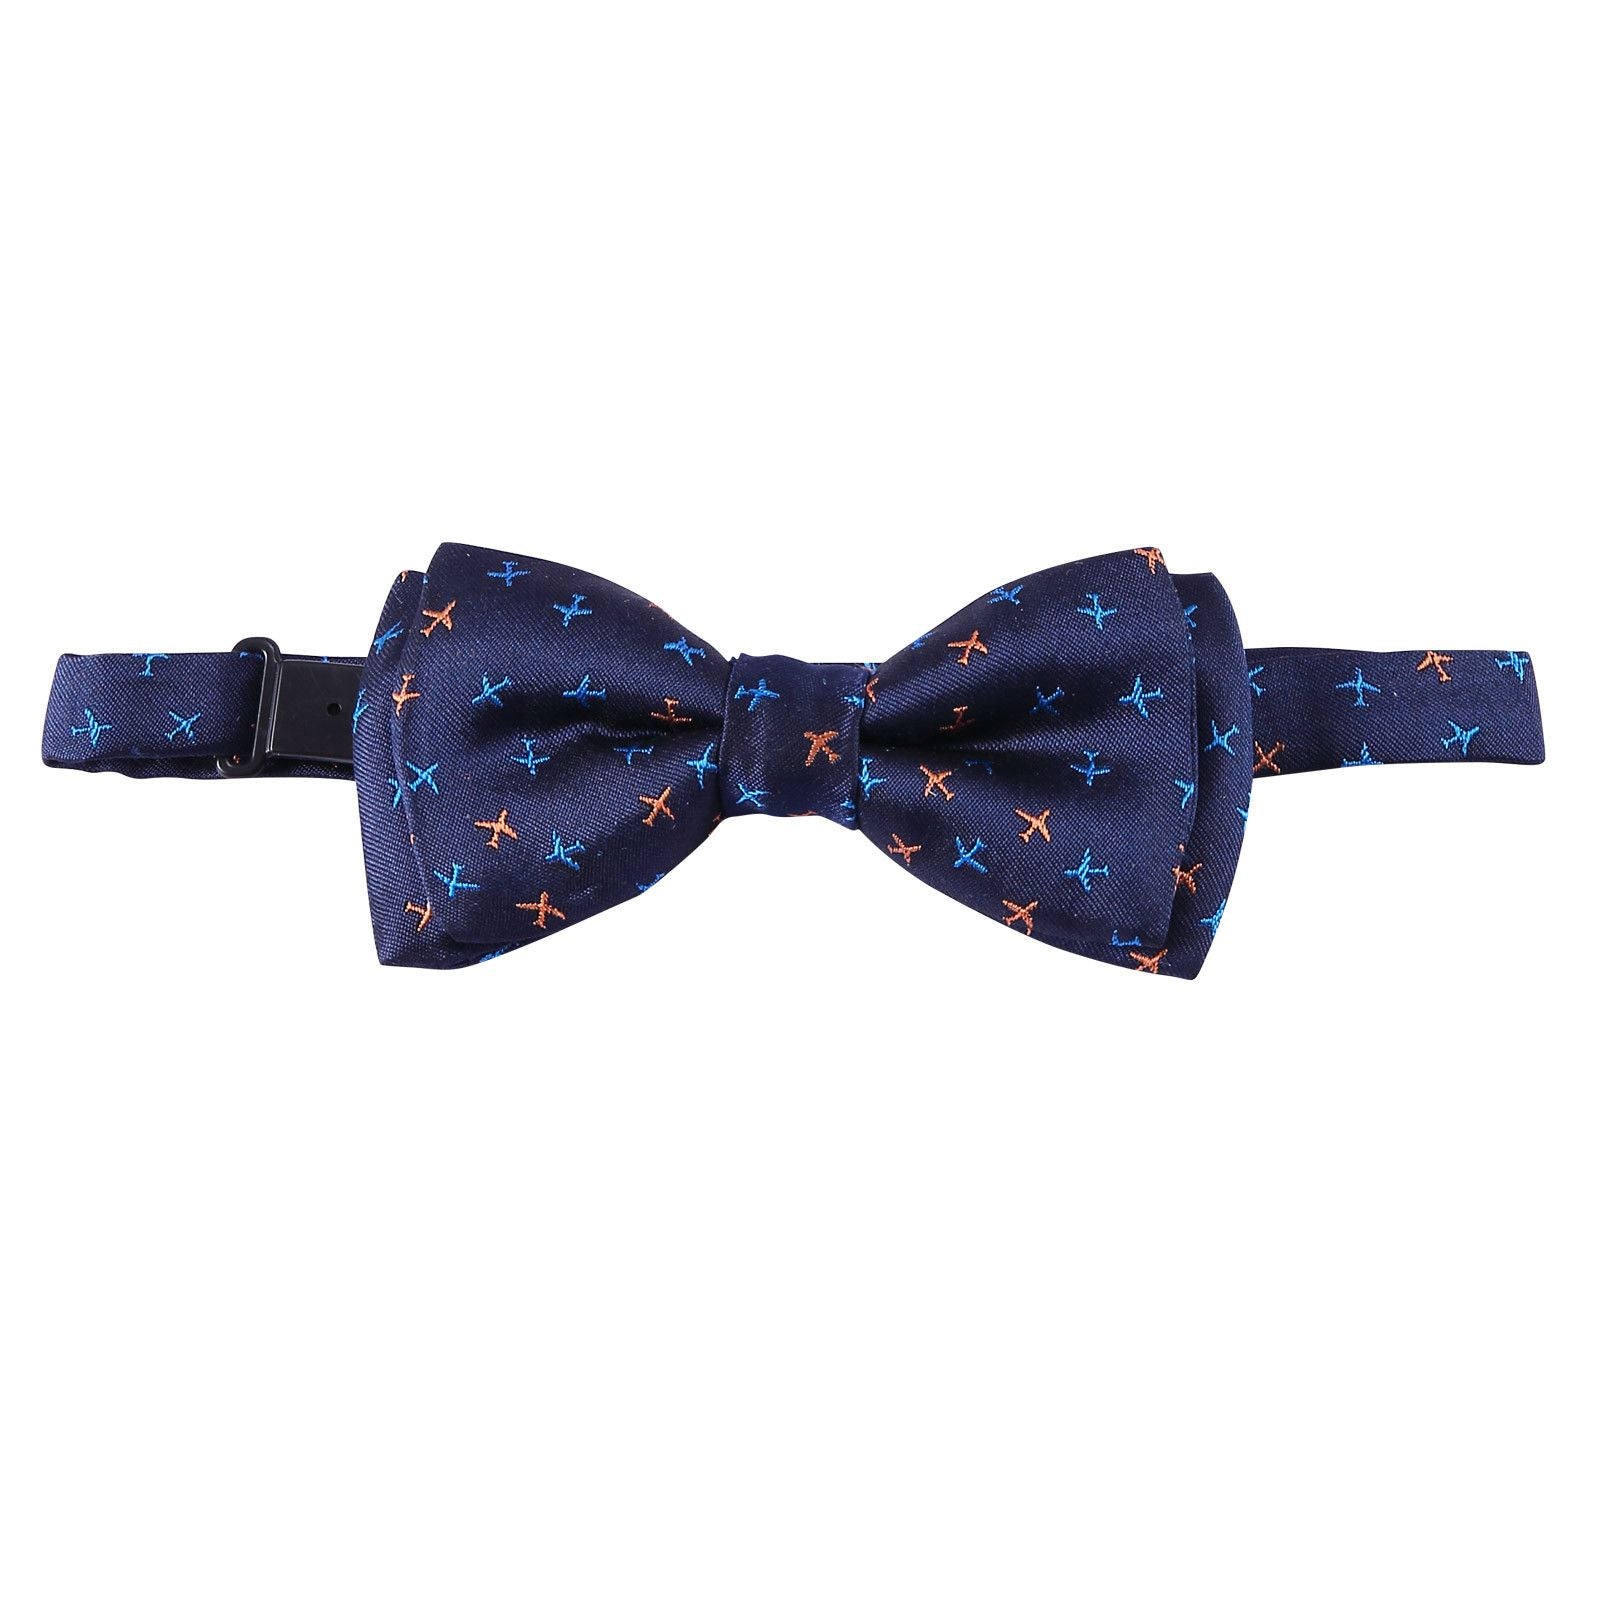 Boys Navy Blue Embroidered Trims Silk Bow Ties - CÉMAROSE | Children's Fashion Store - 1